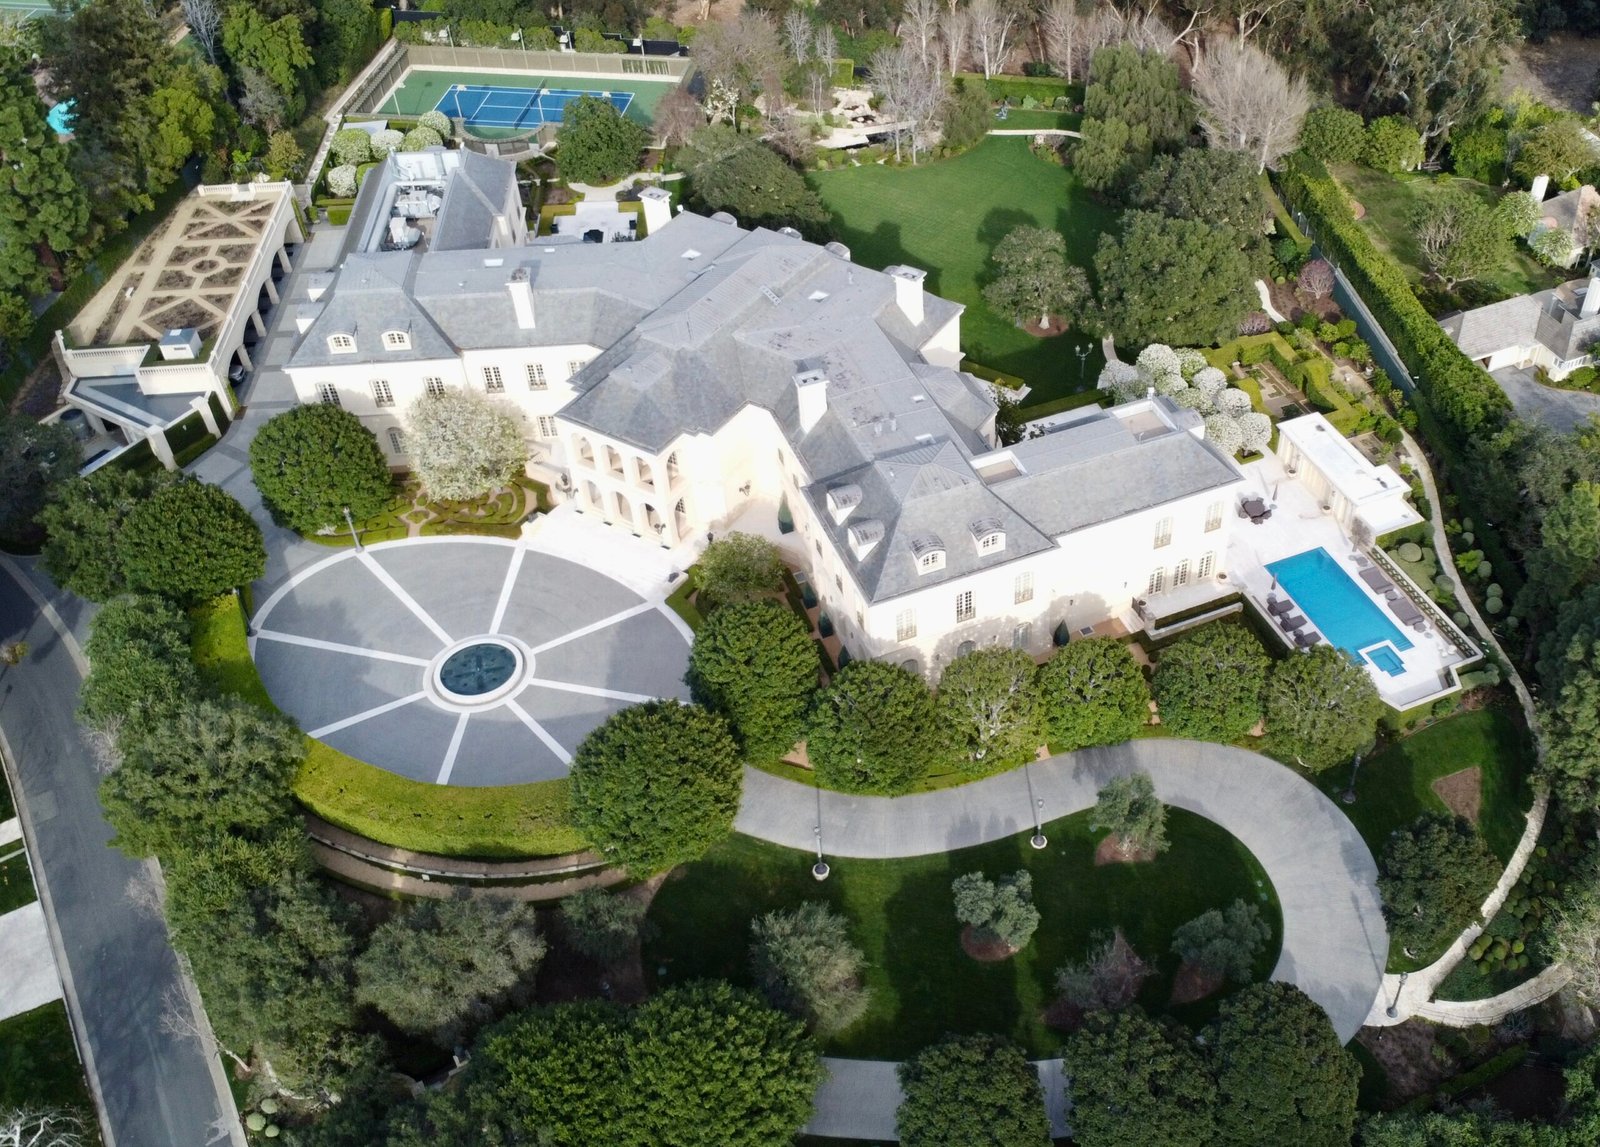 HOLMBY HILLS THE MANOR